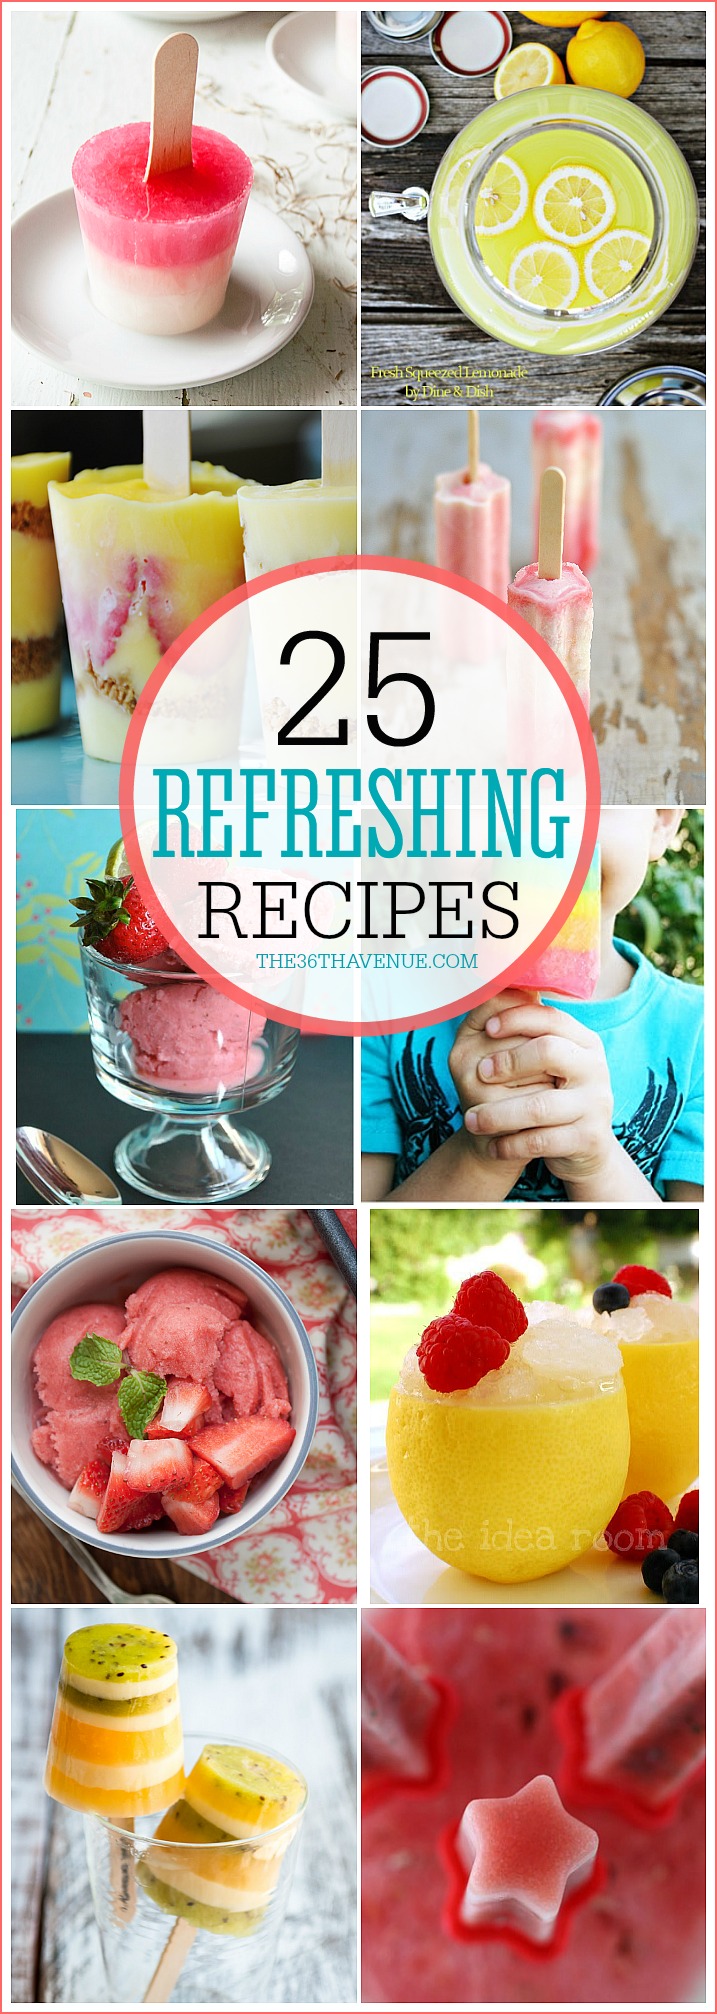 Recipes - Delicious recipes for ice cream, popsicles, sorbets, drinks, and all type of yumminess.